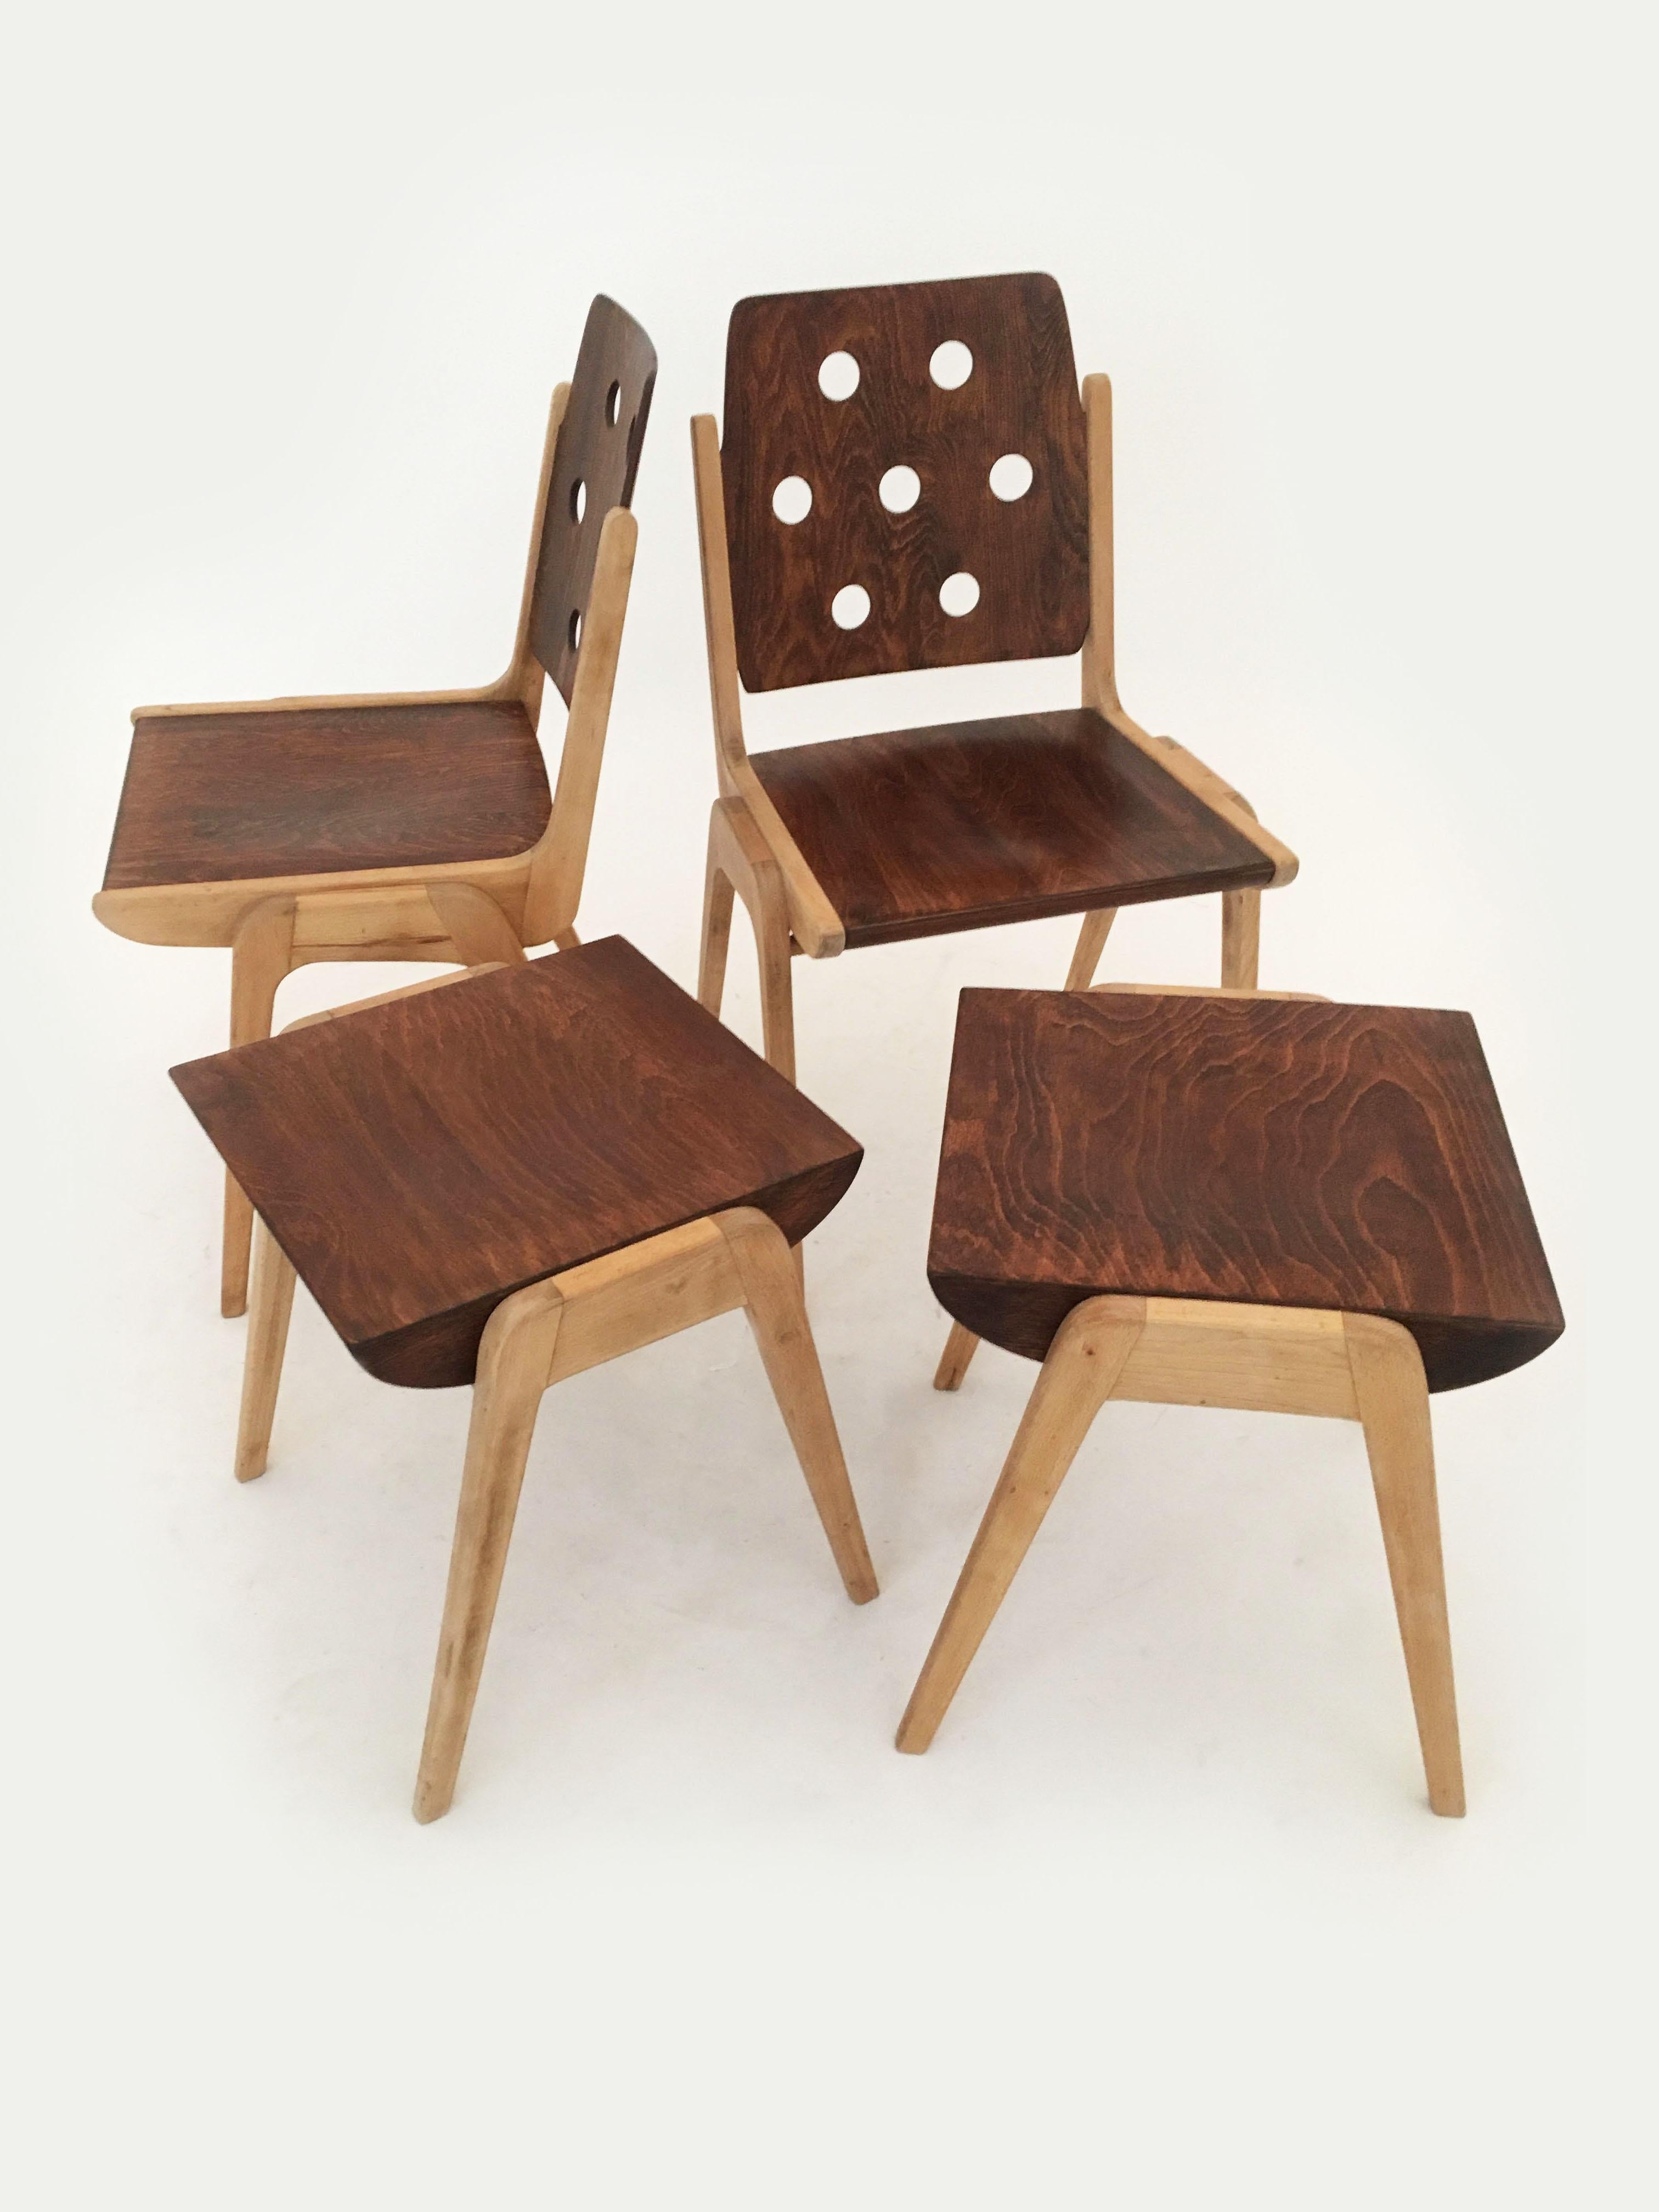 Set of Eight Stacking Dining Chairs Franz Schuster, Duo-Colored, Austria, 1950s For Sale 10